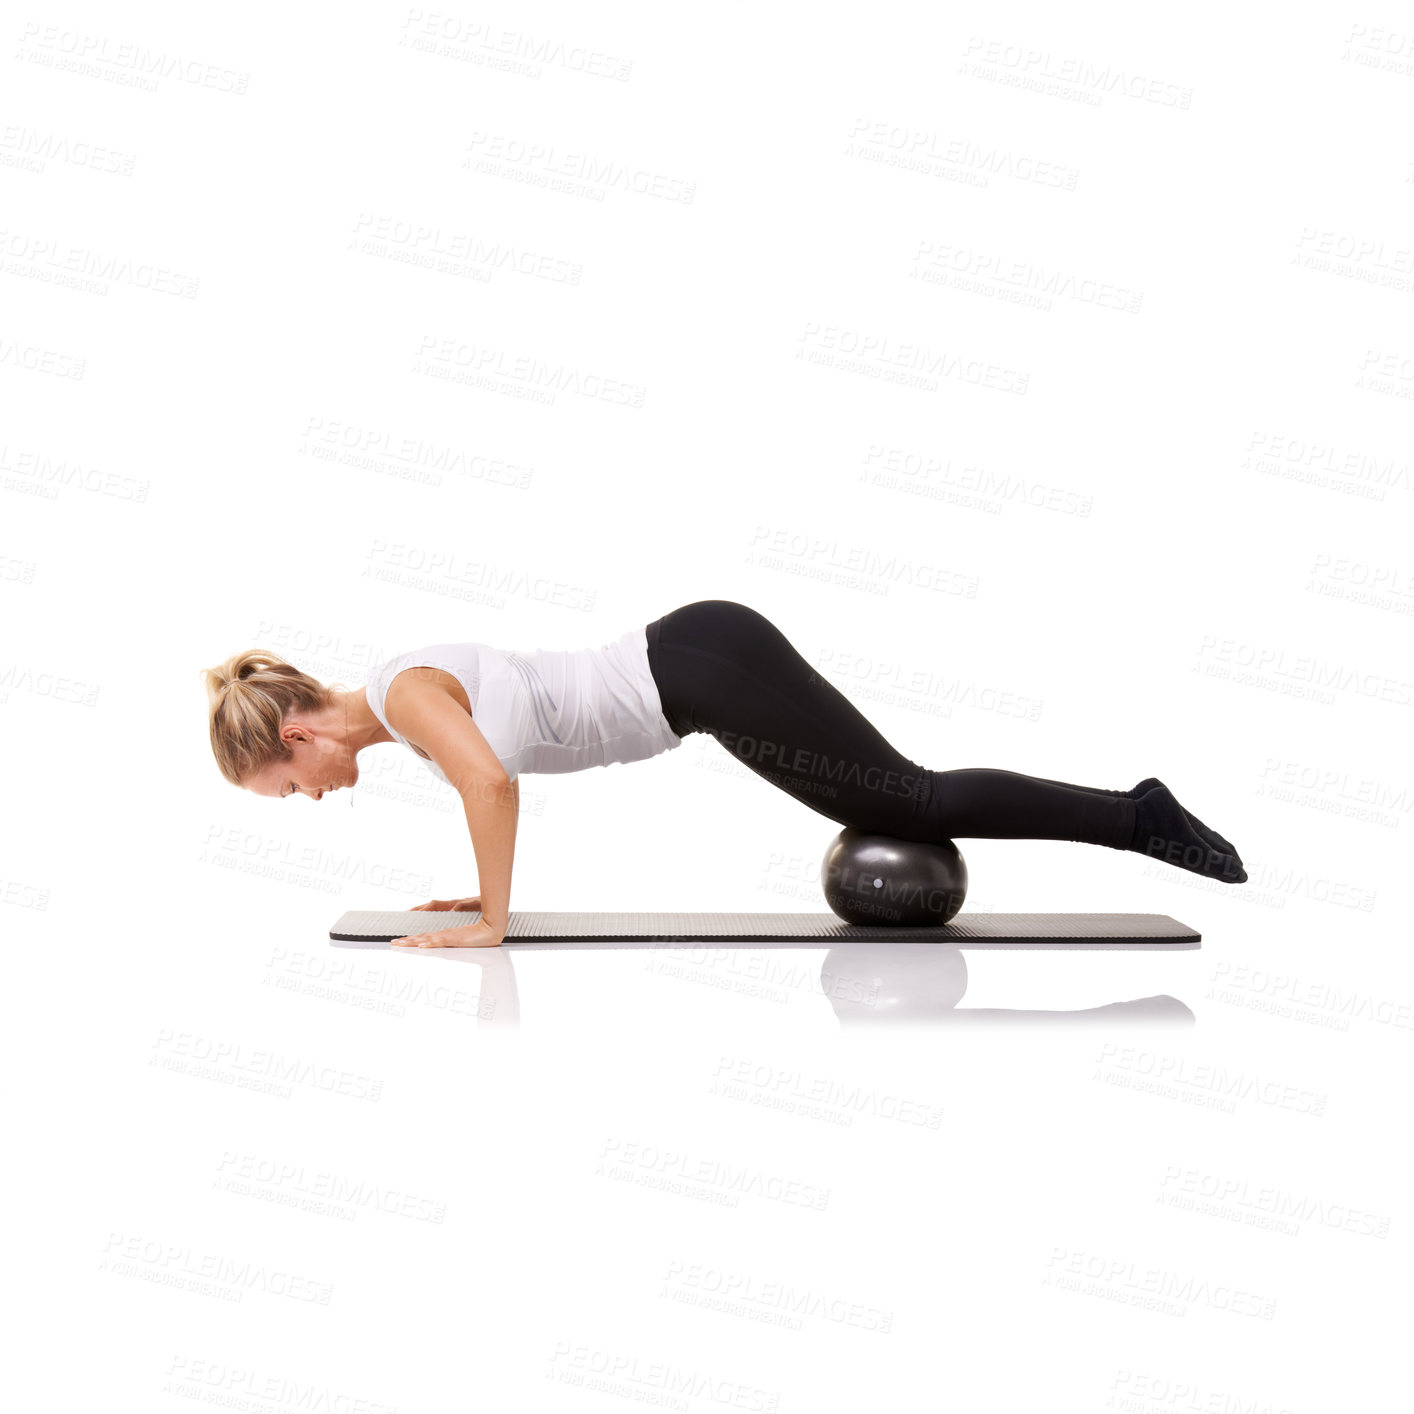 Buy stock photo Fitness, exercise and woman on mat with ball for pilates, body building care and health in studio. Gym, training and girl on floor with cardio, energy and muscle workout isolated on white background.